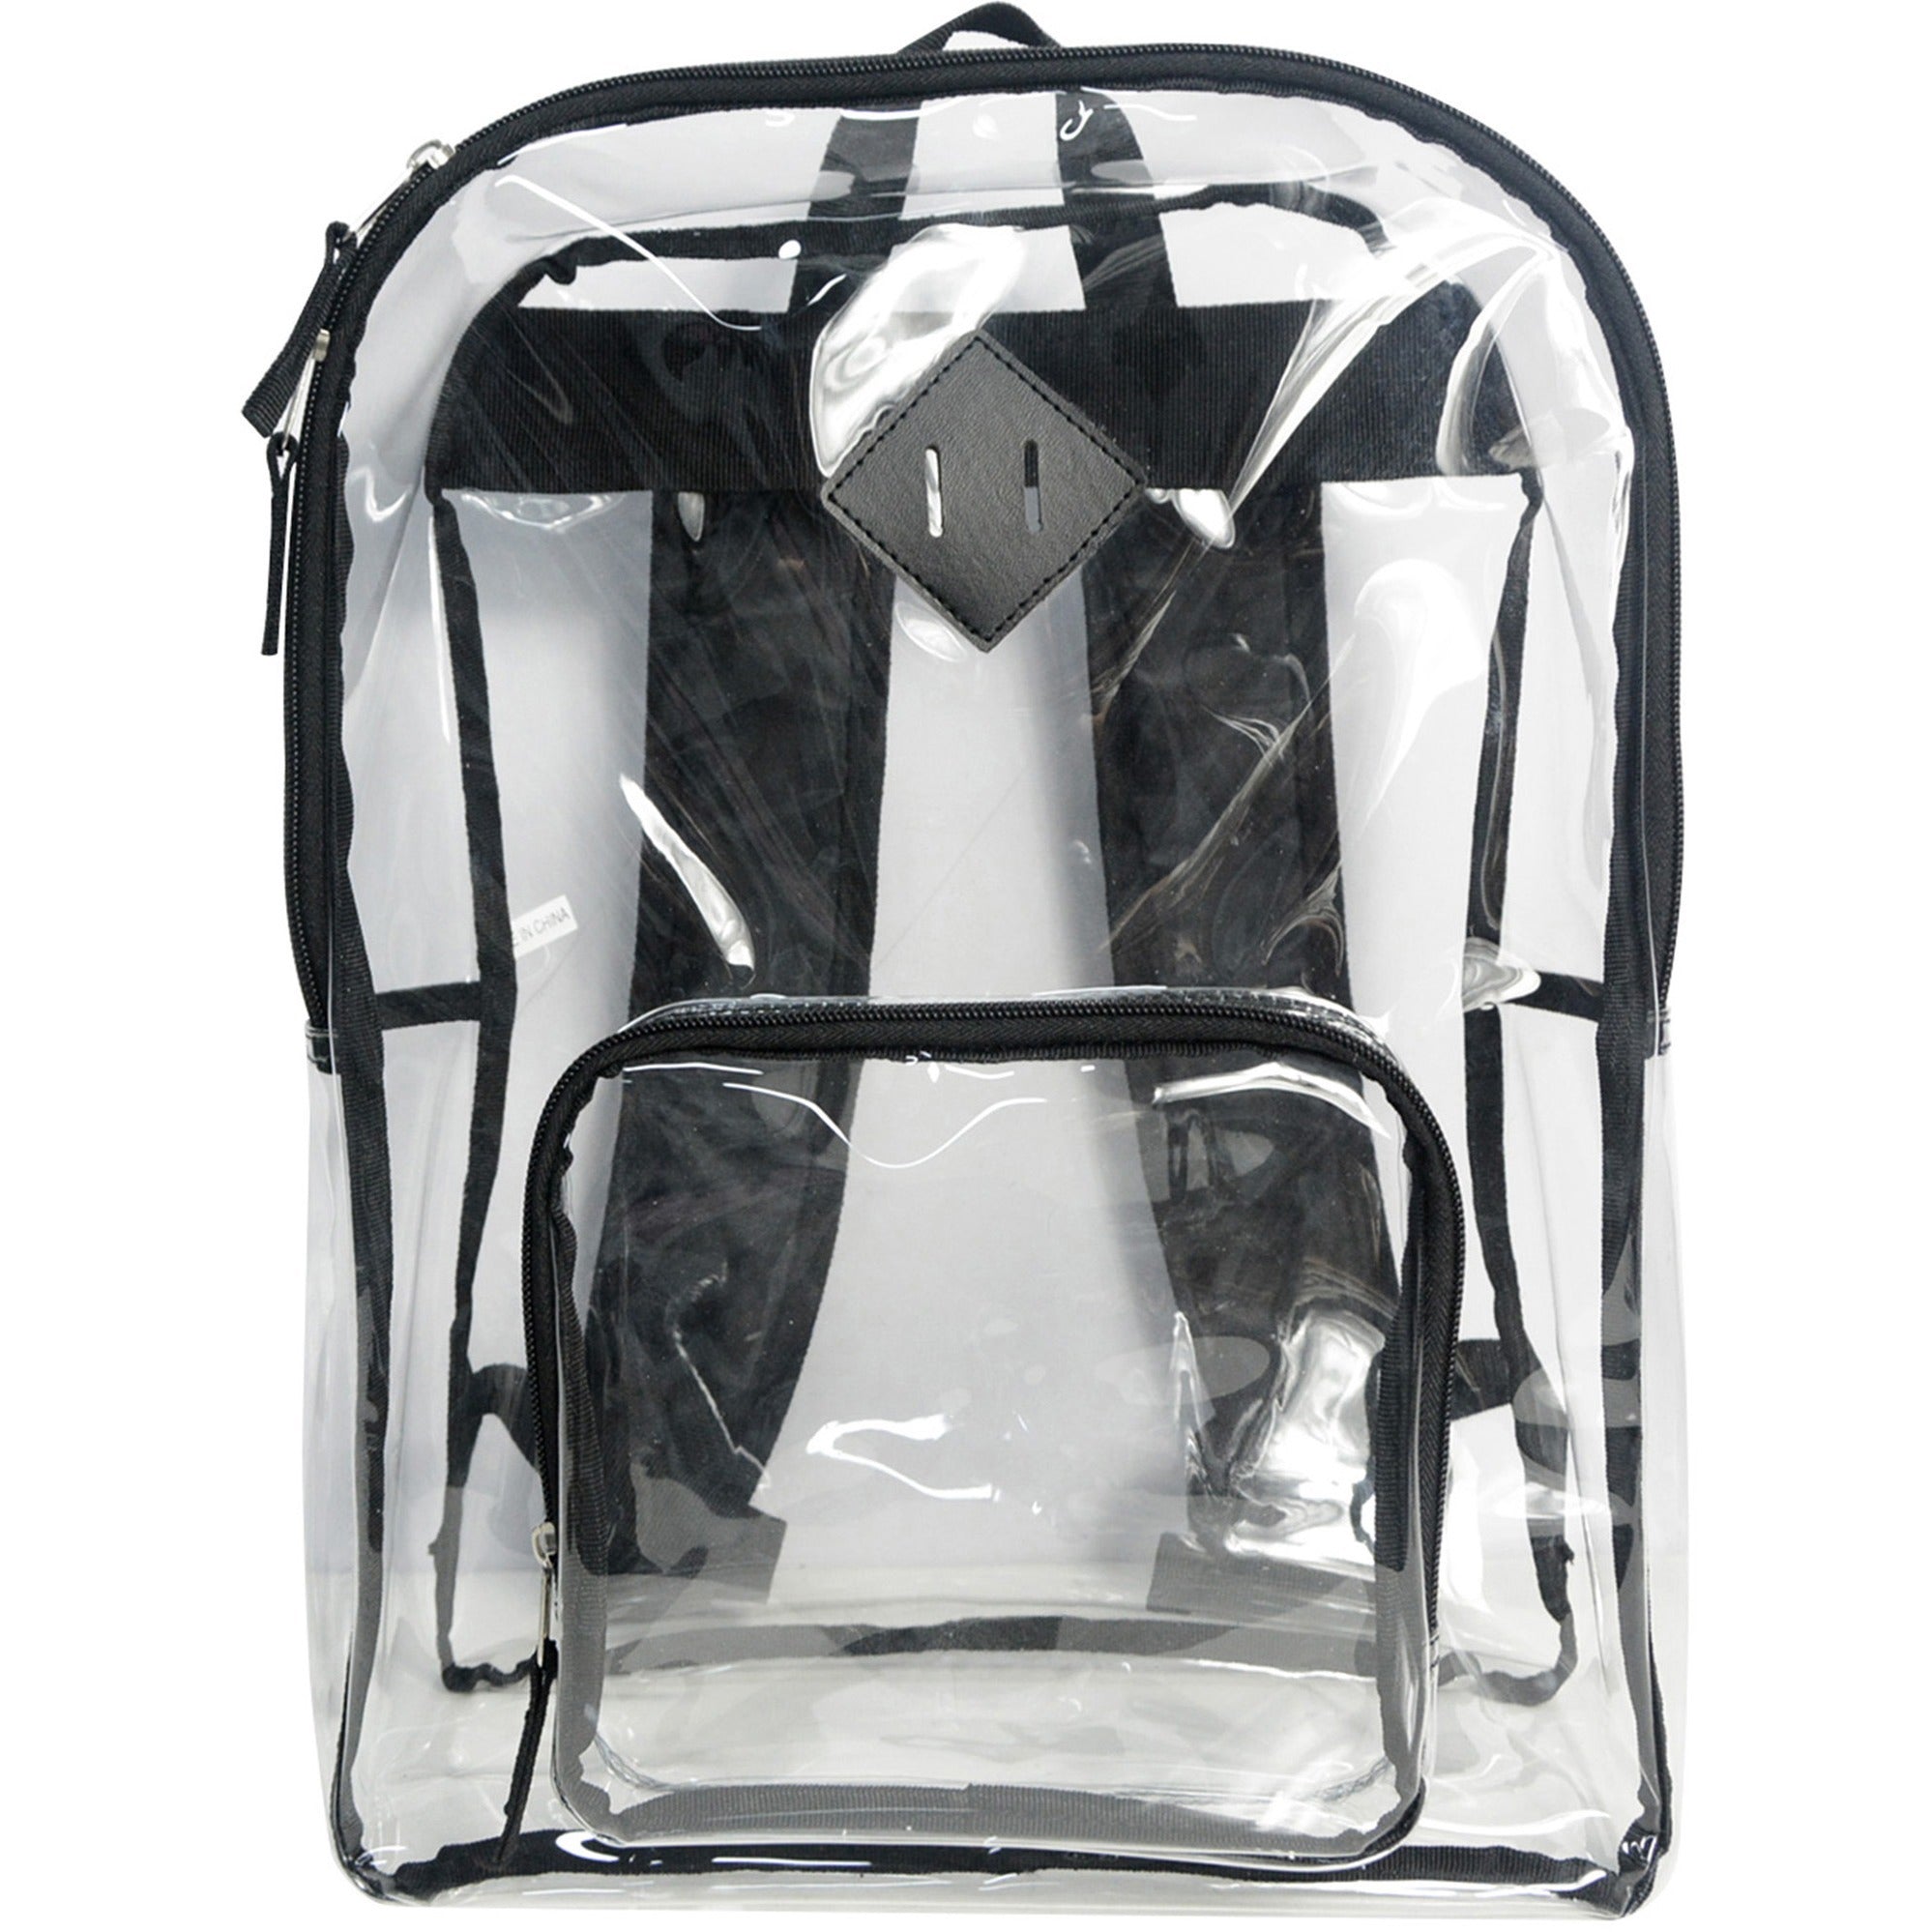 sparco-carrying-case-backpack-multipurpose-clear-polyvinyl-chloride-pvc-420d-oxford-body-shoulder-strap-handle-17-height-x-12-width-x-5-depth-1-each_spr61617 - 2